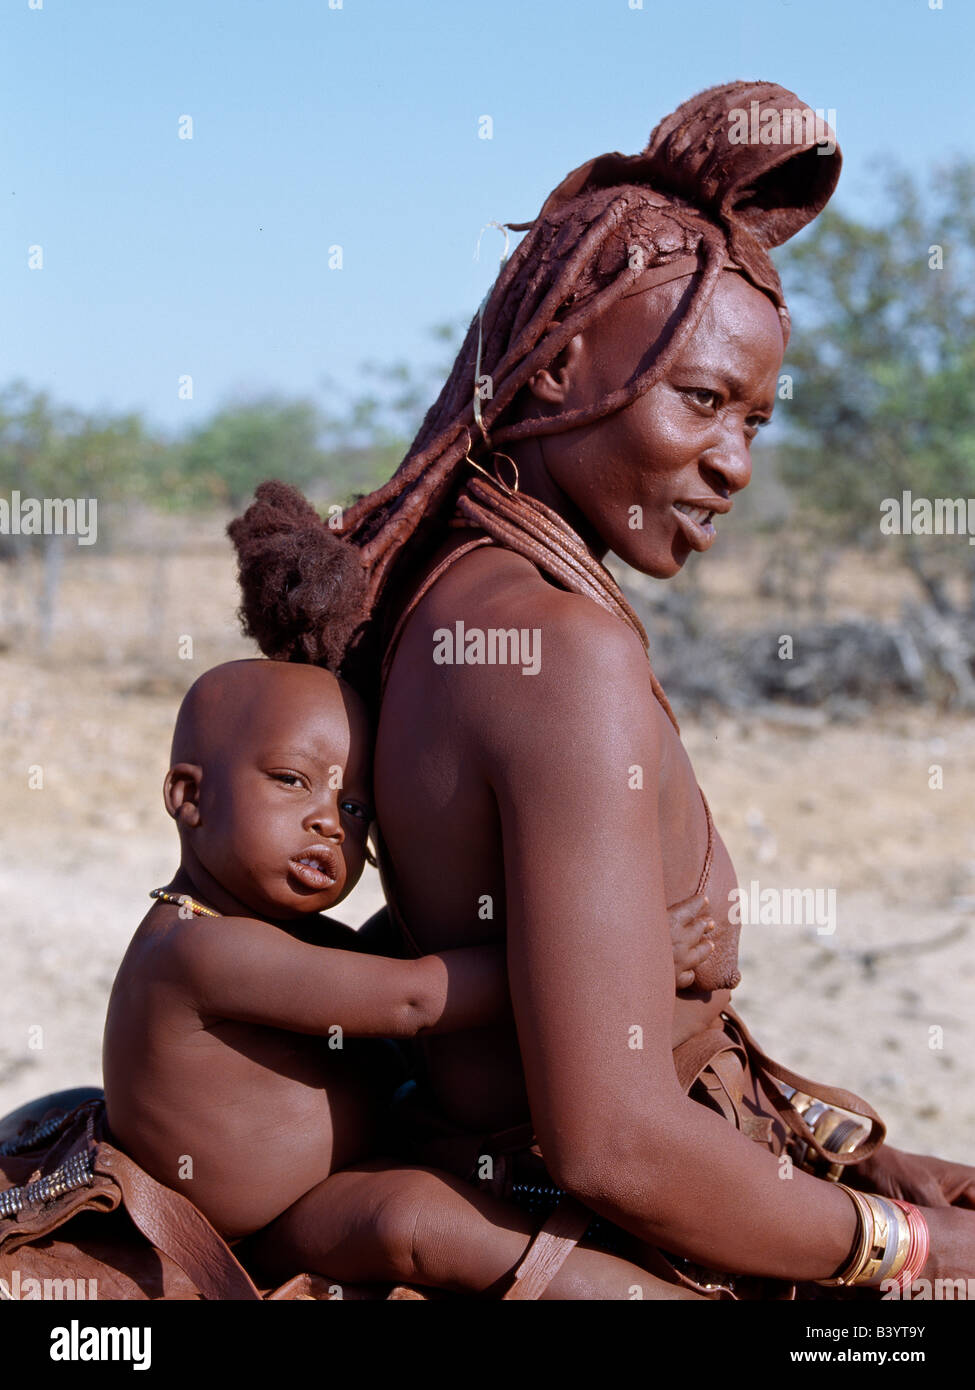 Namibia, Kaokoland, Opuwo. A Himba mother and child ride home on a donkey. Their bodies gleam from a mixture of red ochre, butterfat and herbs. The woman's long hair is styled in the traditional Himba way and is crowned with a headdress made of lambskin, called erembe. The Himba are Herero-speaking Bantu nomads who live in the harsh, dry but starkly beautiful landscape of remote northwest Namibia. Stock Photo